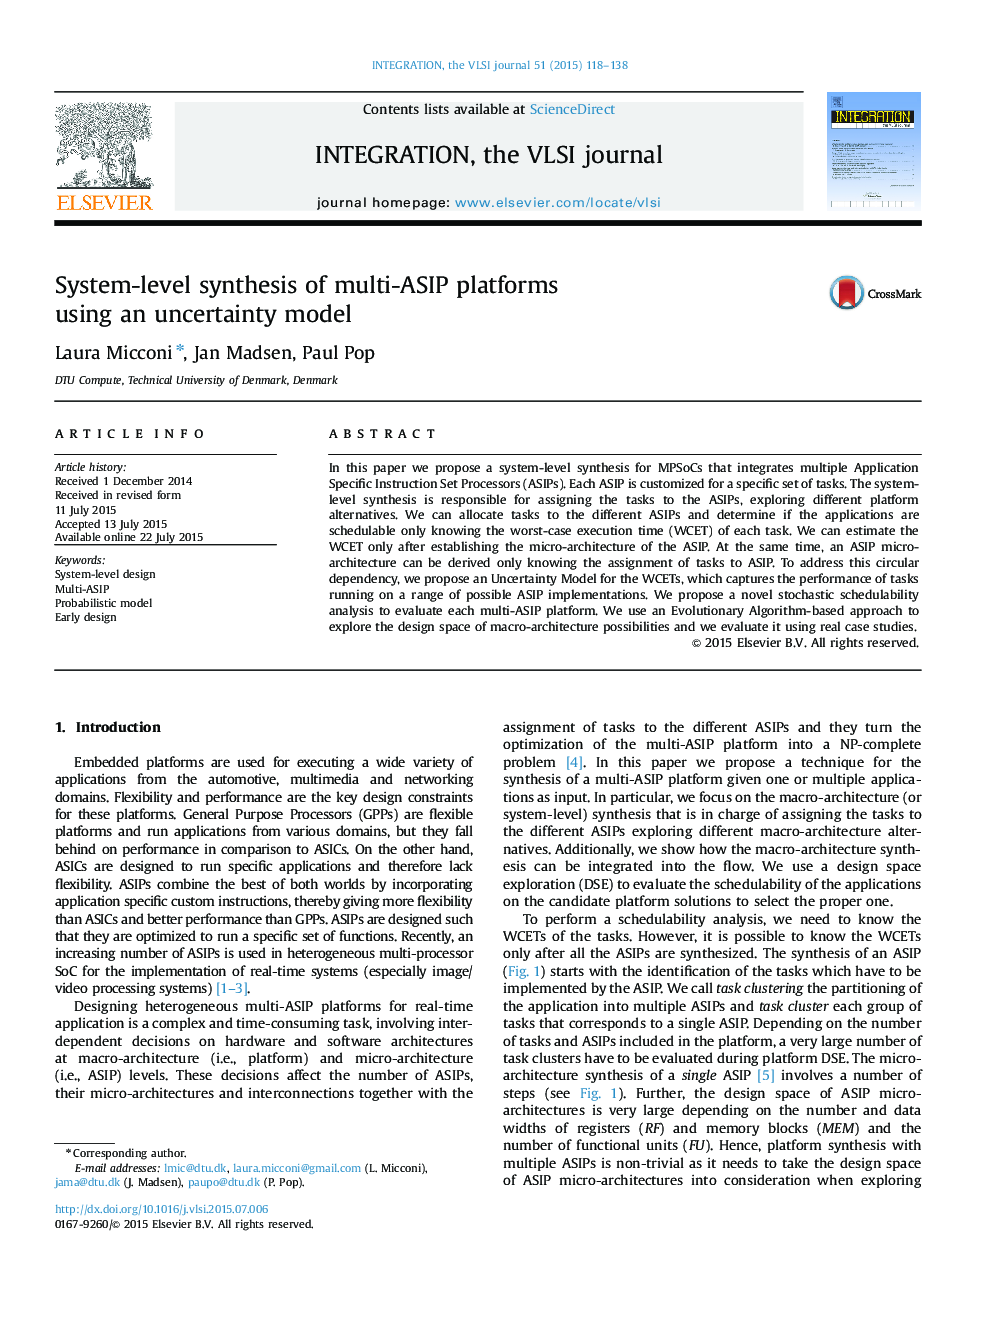 System-level synthesis of multi-ASIP platforms using an uncertainty model